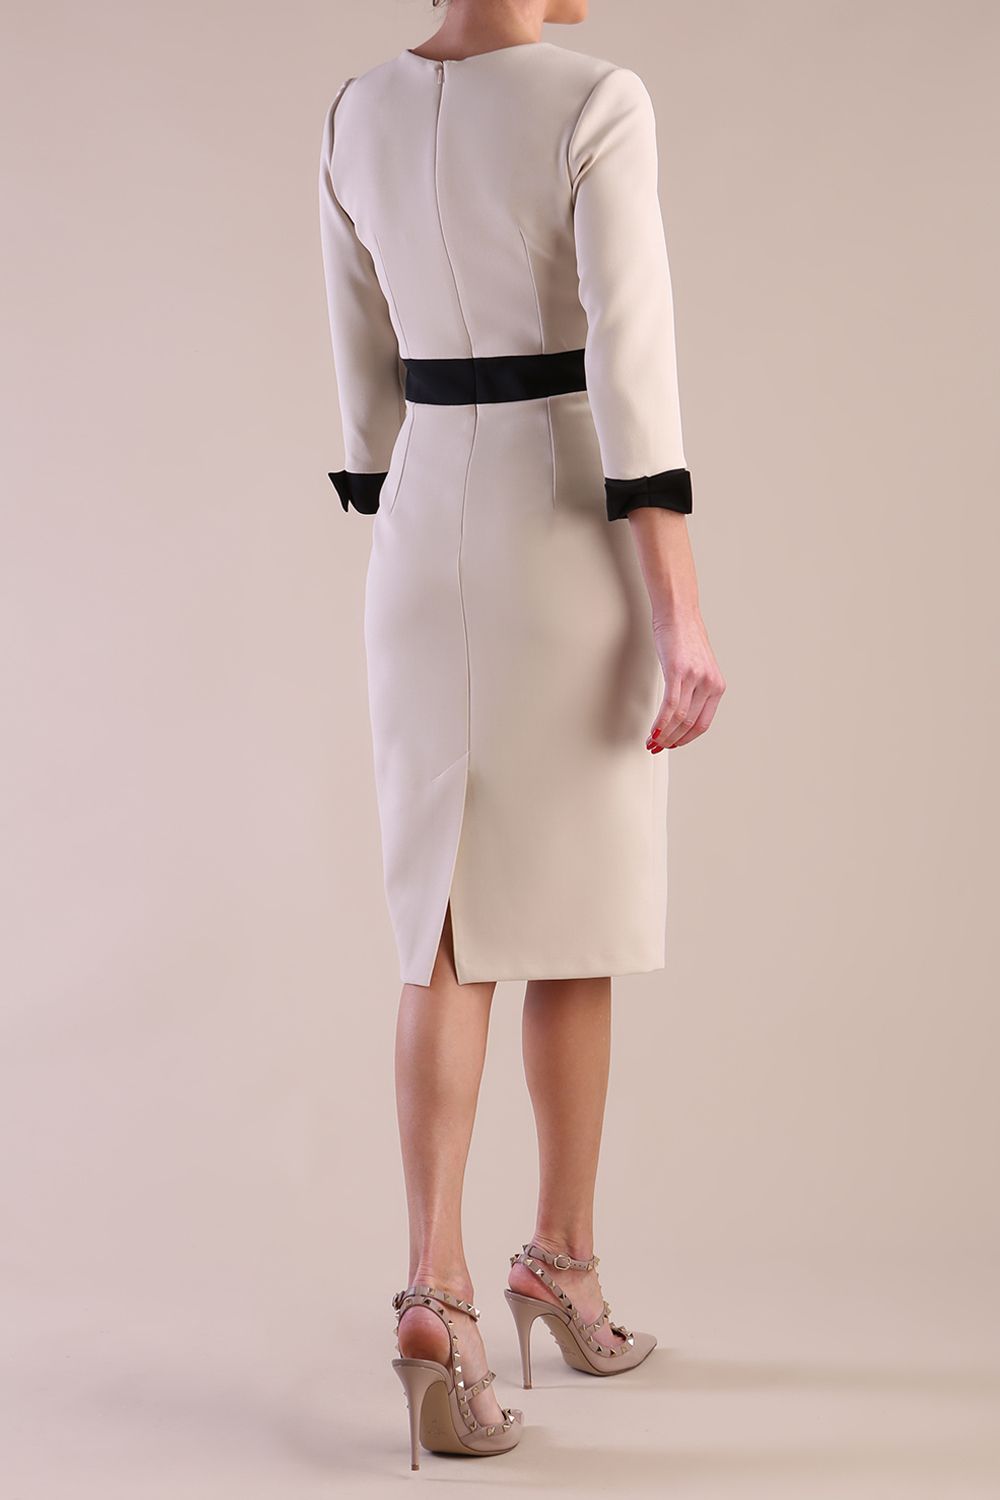 Back Image of Model wearing diva catwalk Reese 3/4 Sleeved pencil skirt dress with a contrast sleeve and waistband details in Sandshell Beige/Black